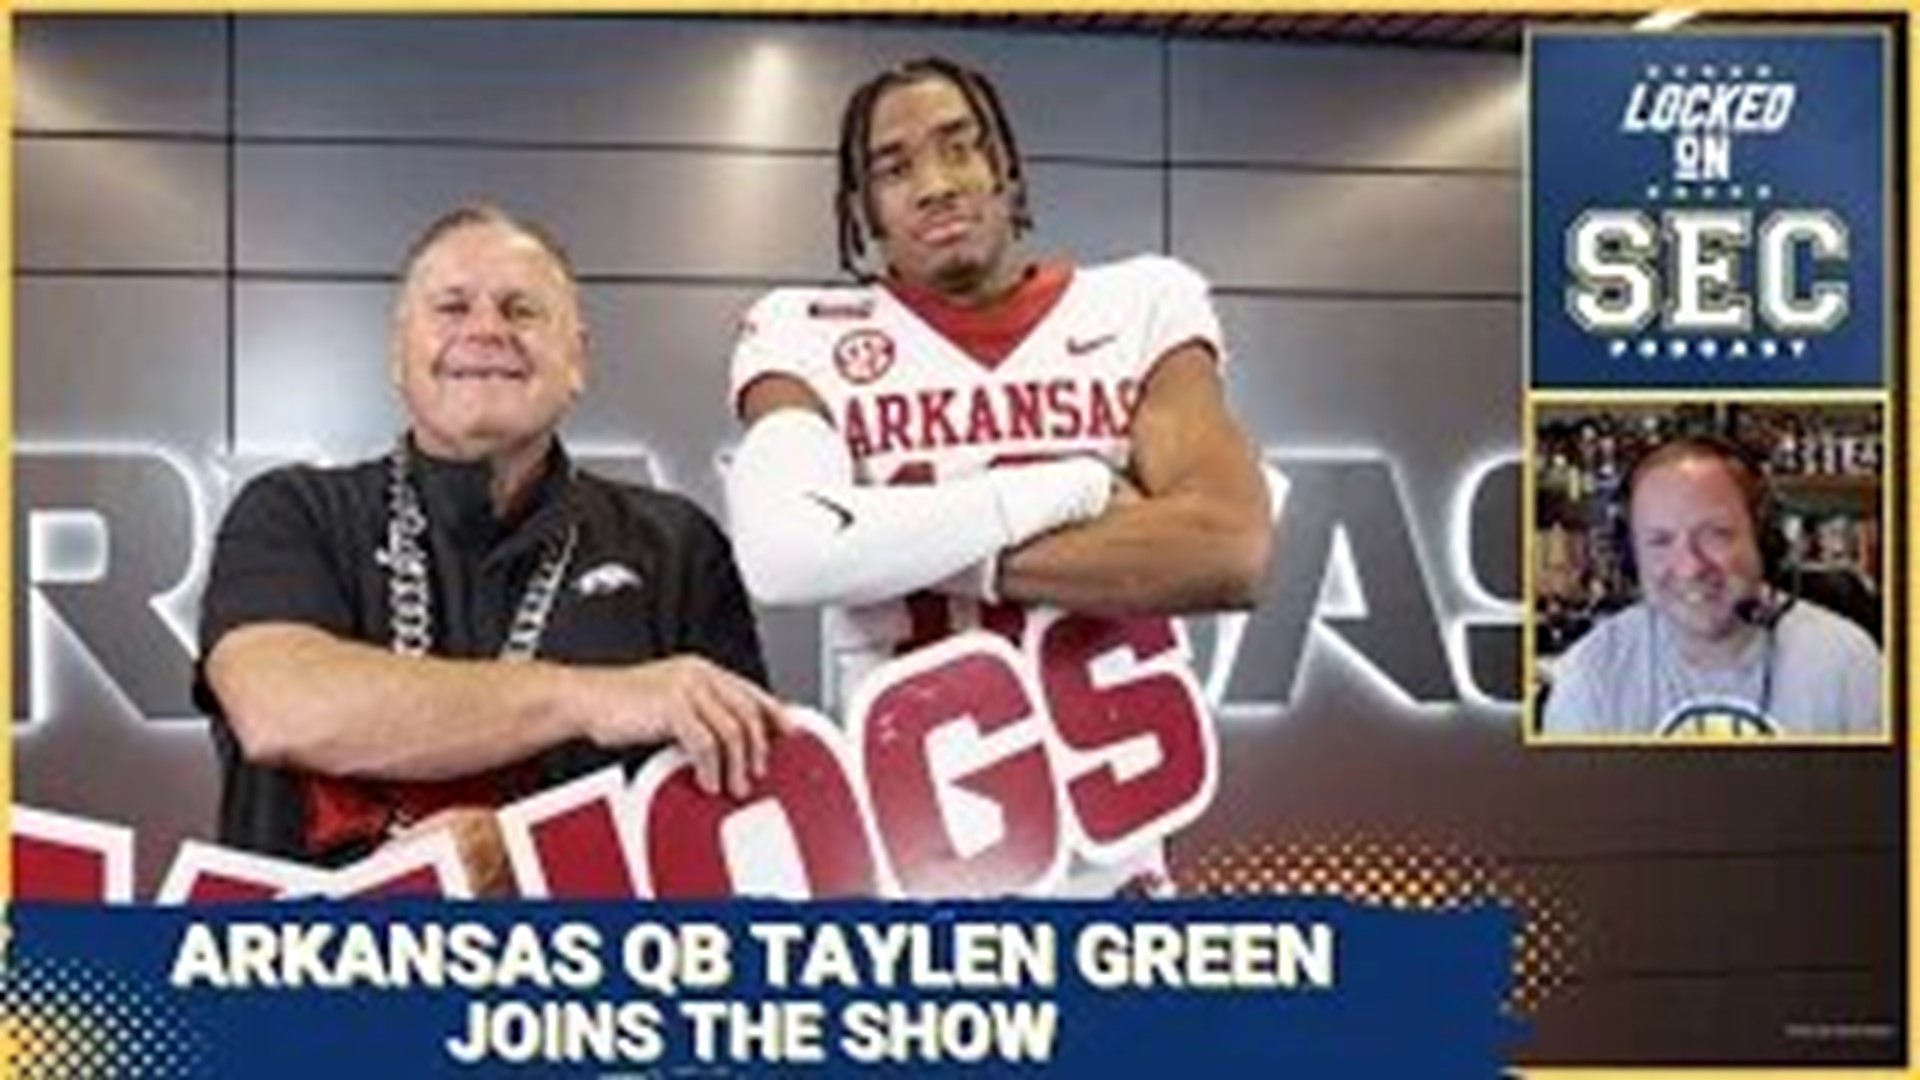 On today's show, we catch up with Arkansas QB Taylen Green, the Boise State transfer who took his talents to Fayetteville this offseason.